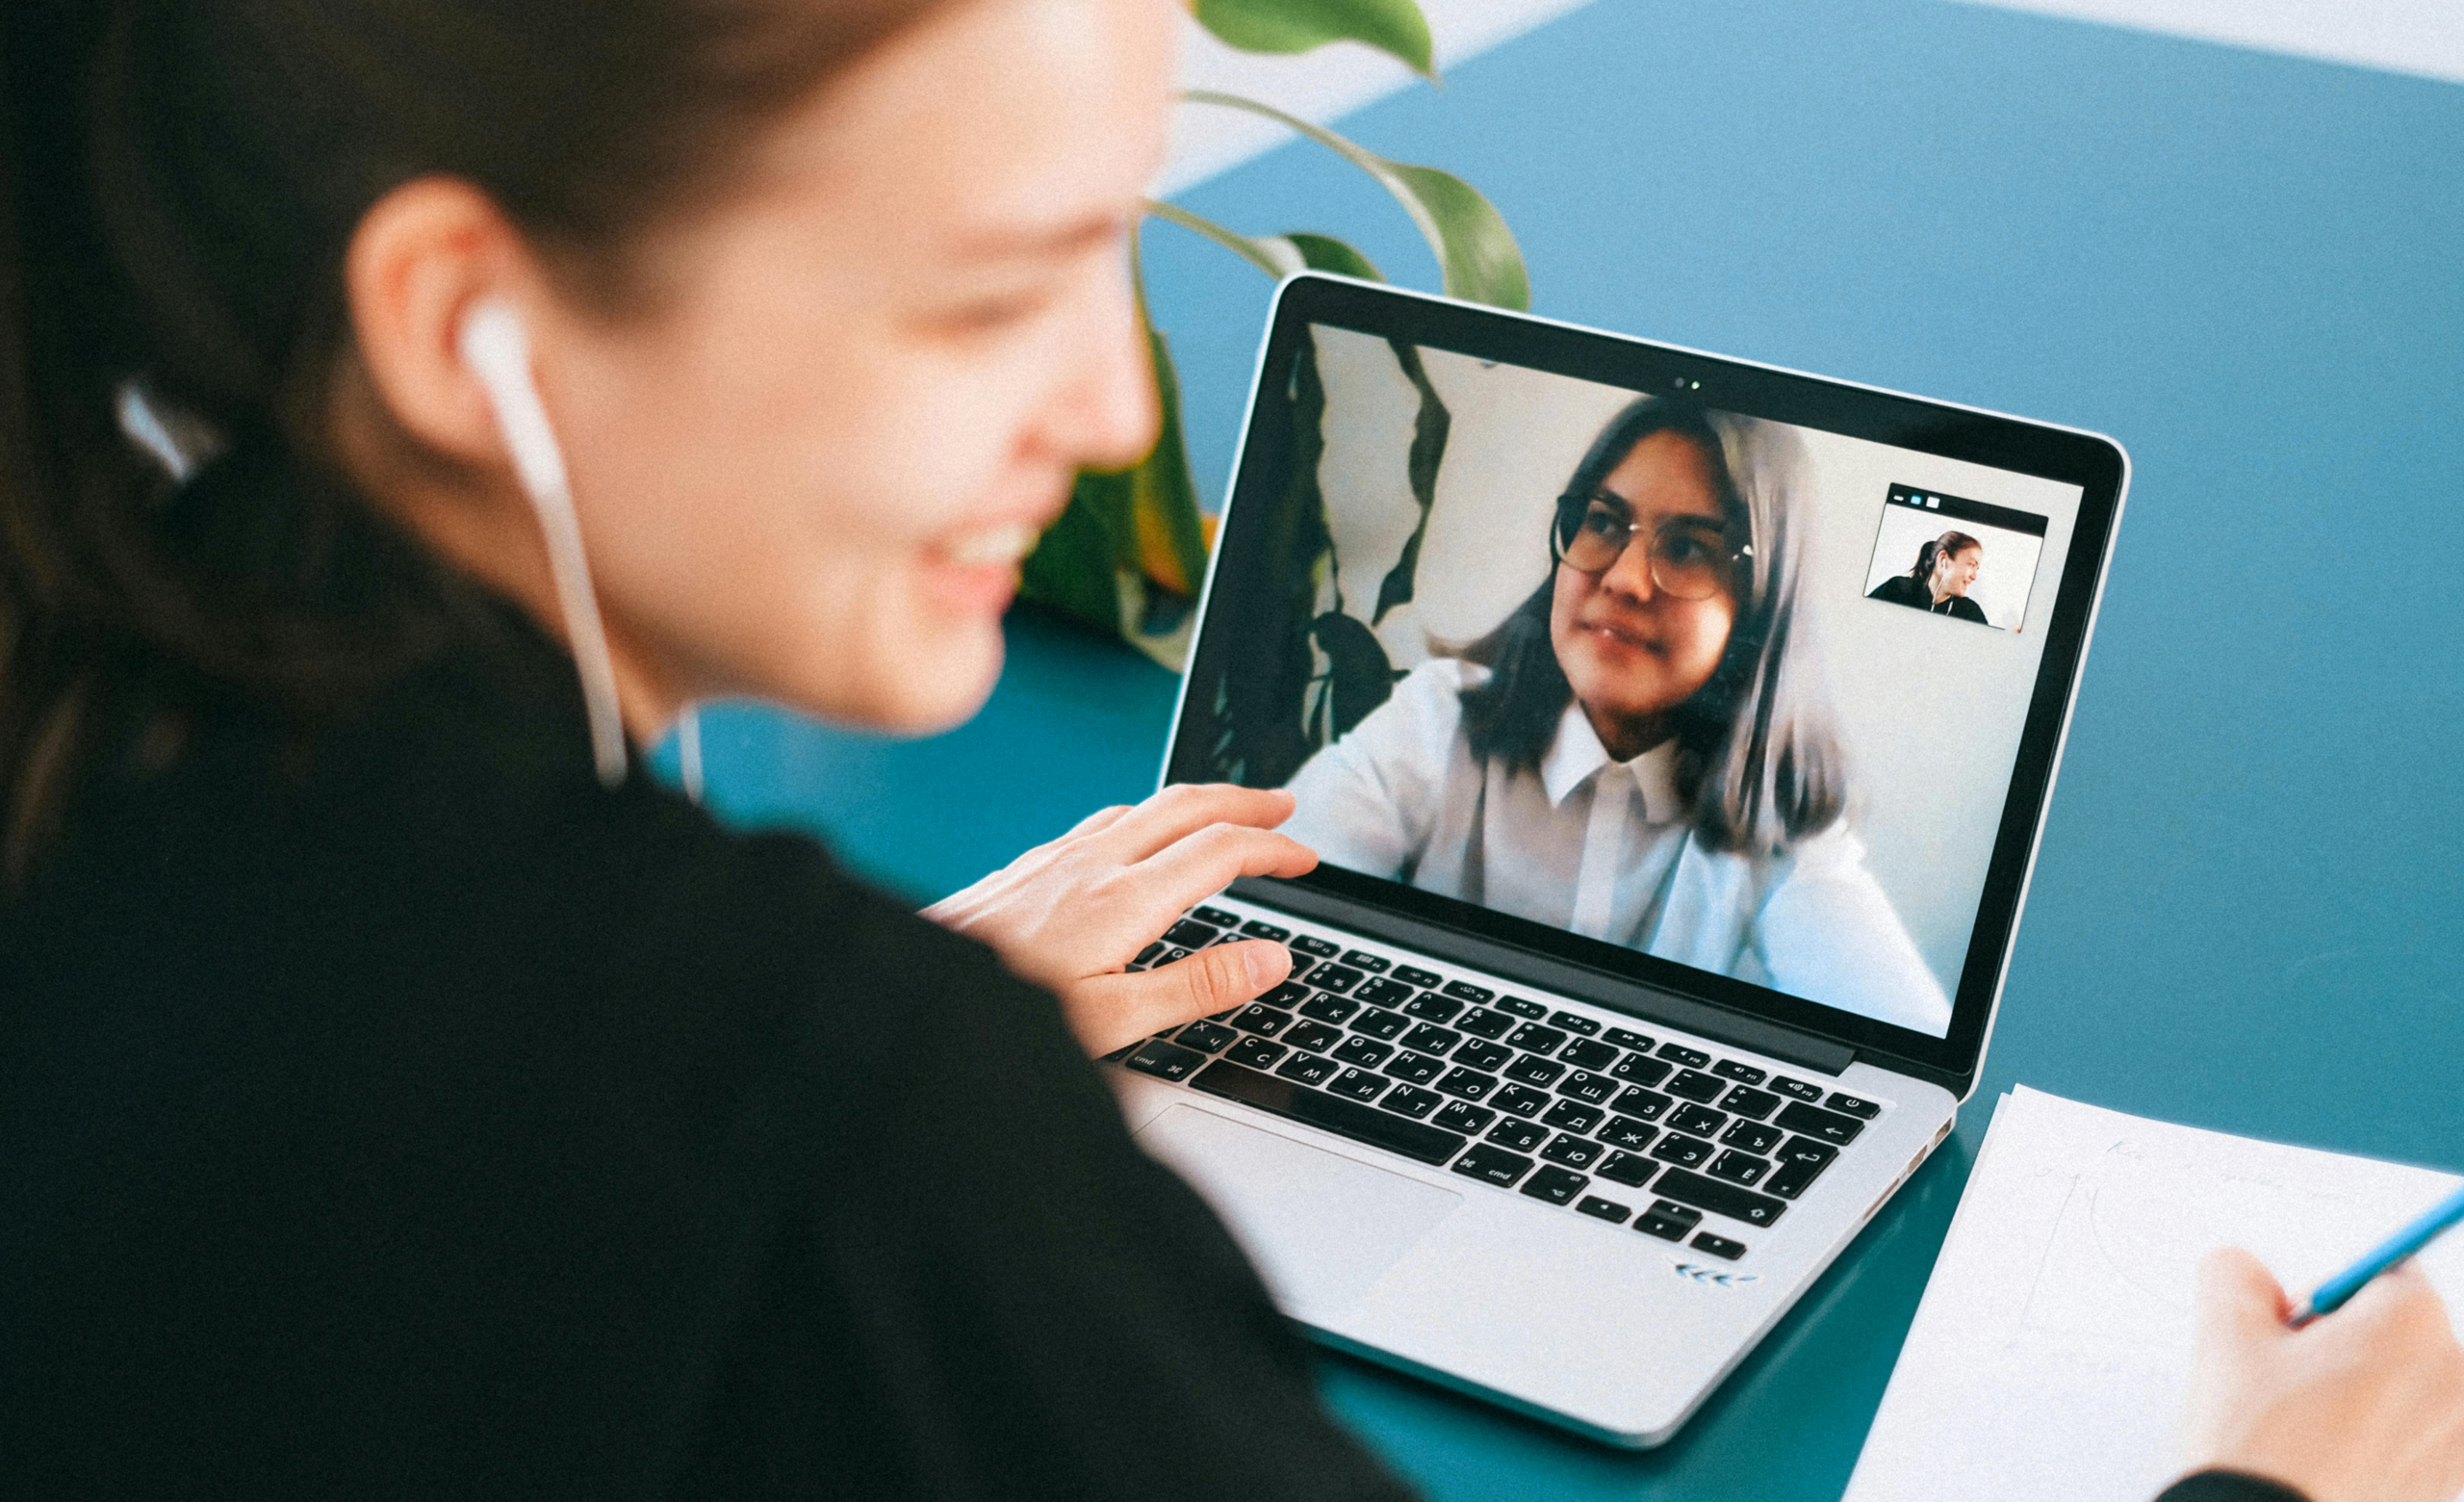 Two People on a Video Call